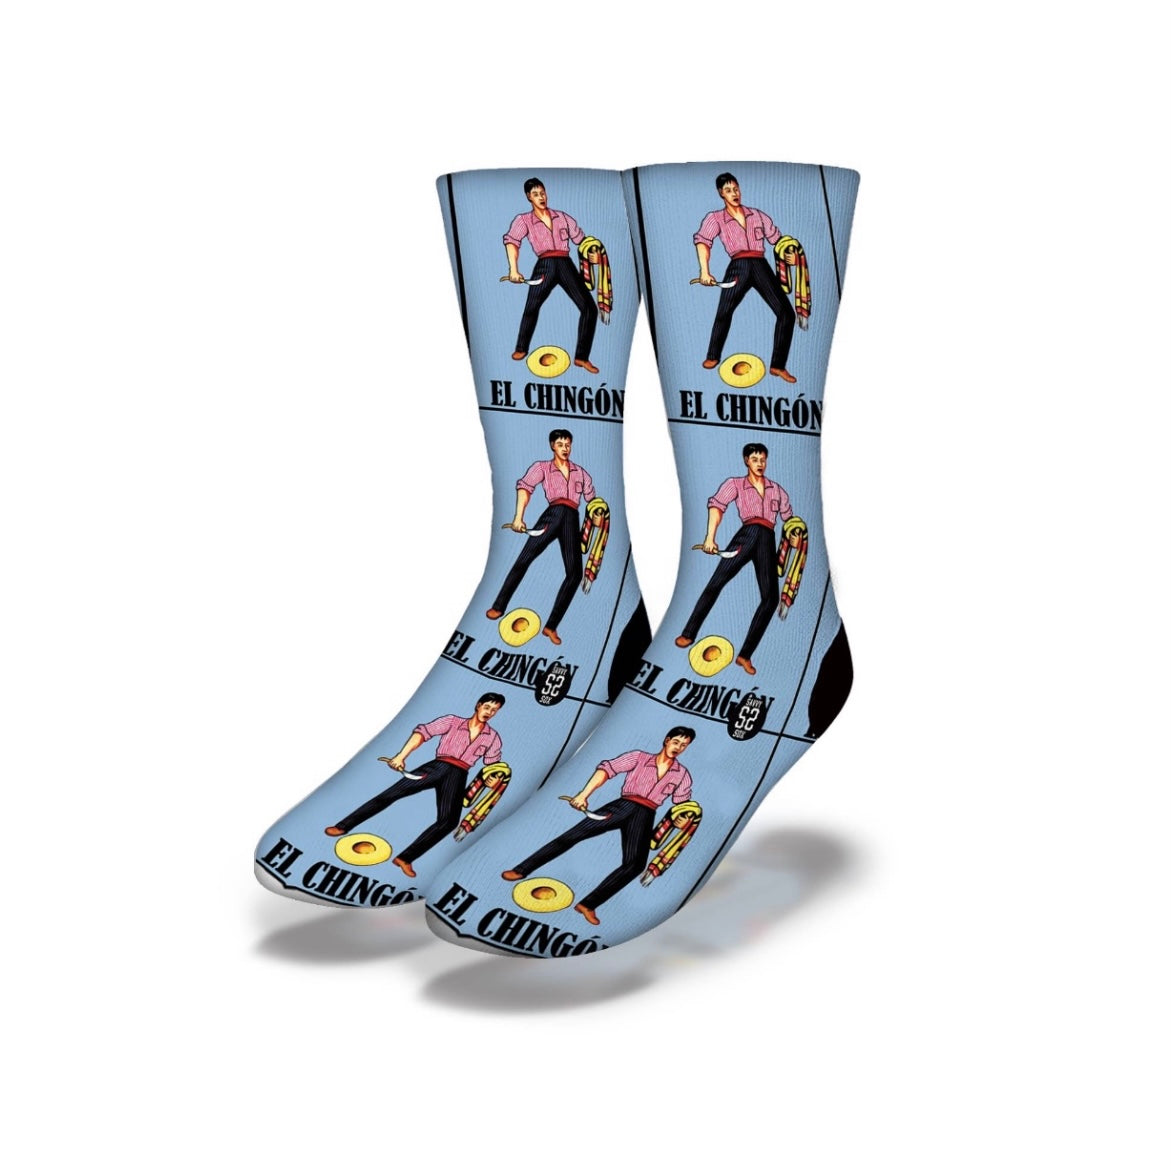 Men's mid calf El Chingon loteria inspired socks with pale blue and black accents.